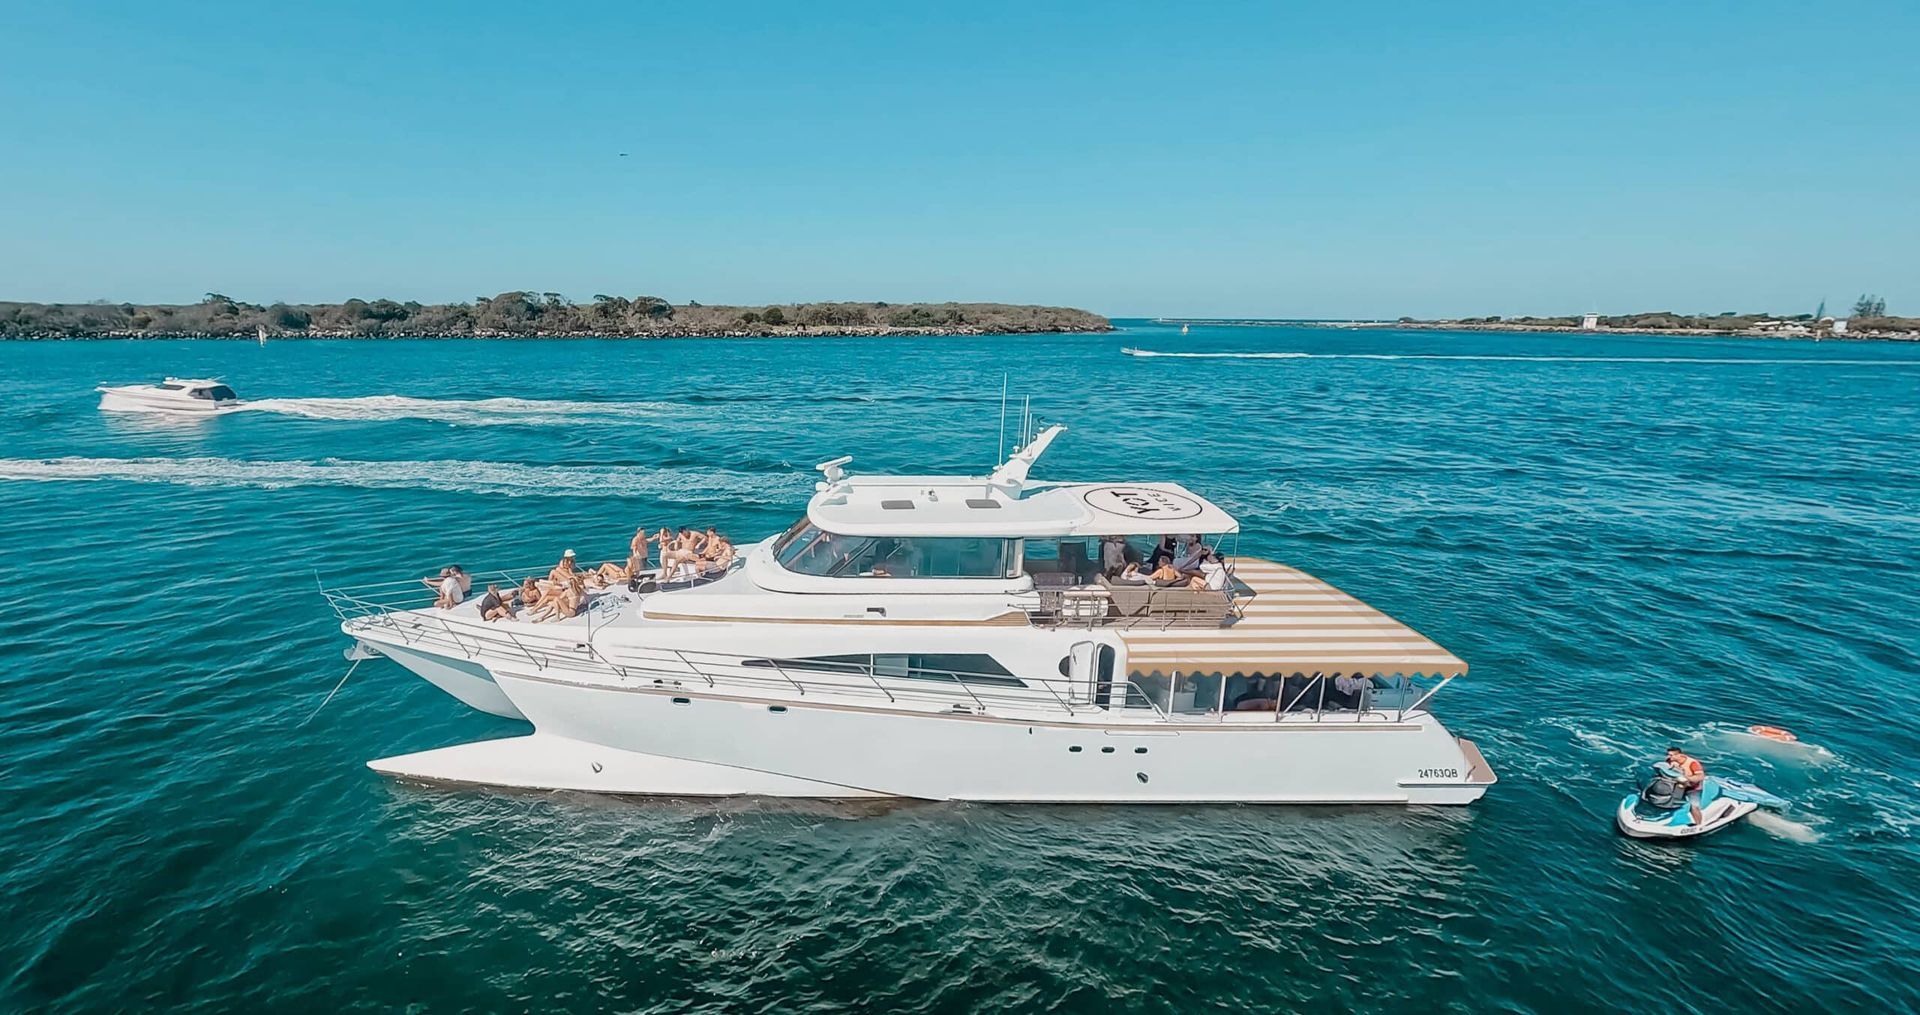 YOT VICE | From $1,250 Per Hour | 76 Guests